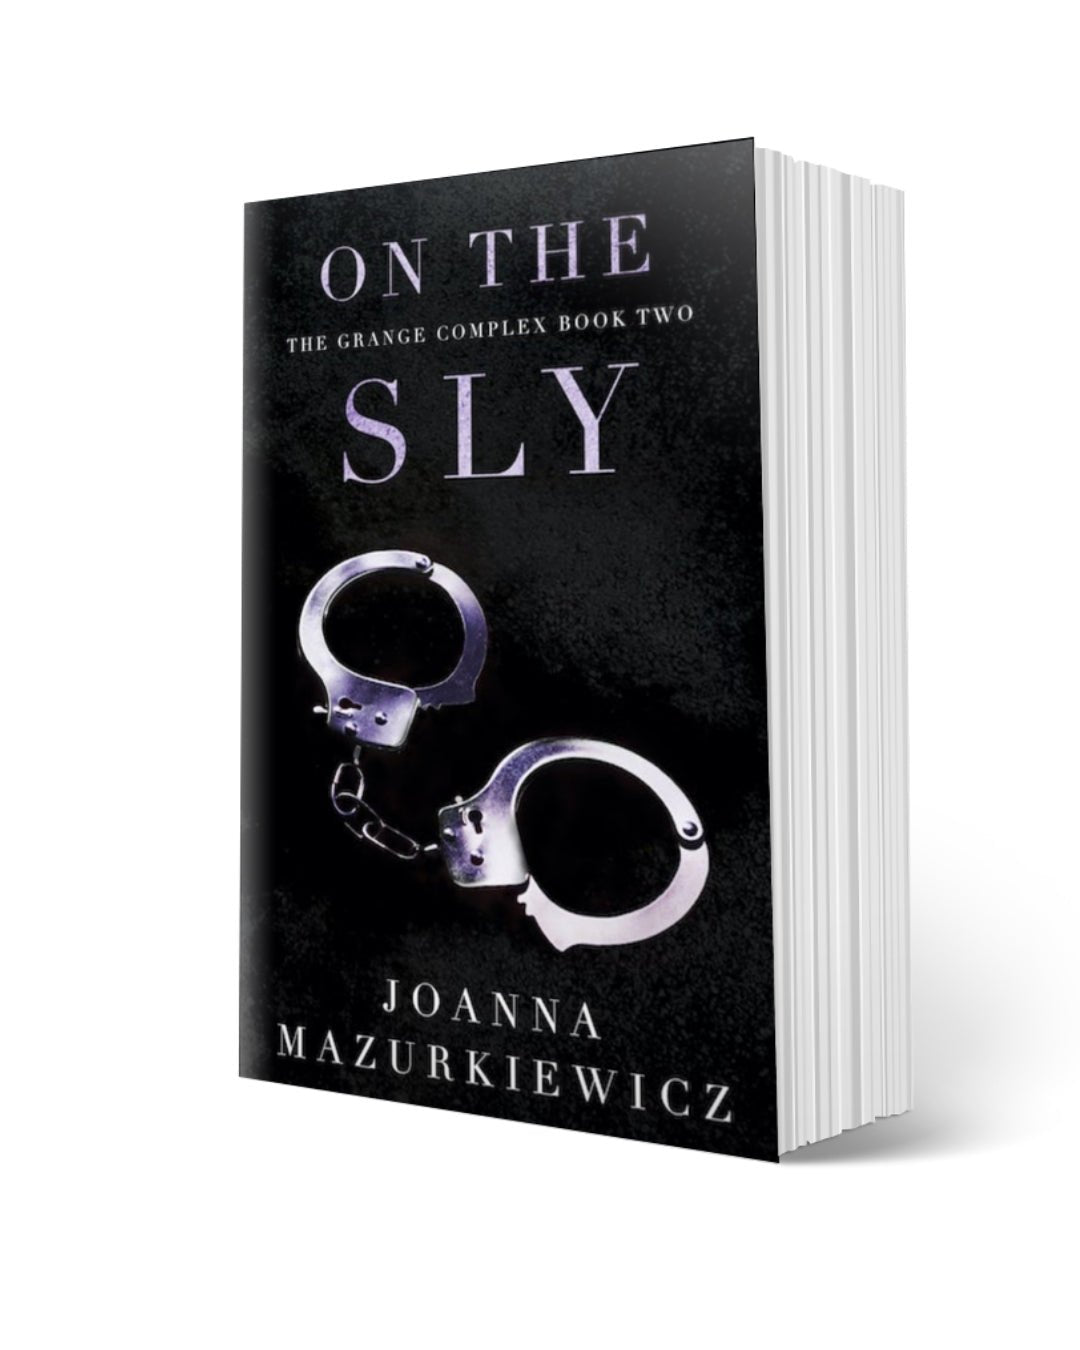 Paperback Copy of On the Sly (The Grange Complex Book 2) - JMazurkiewiczbookstore